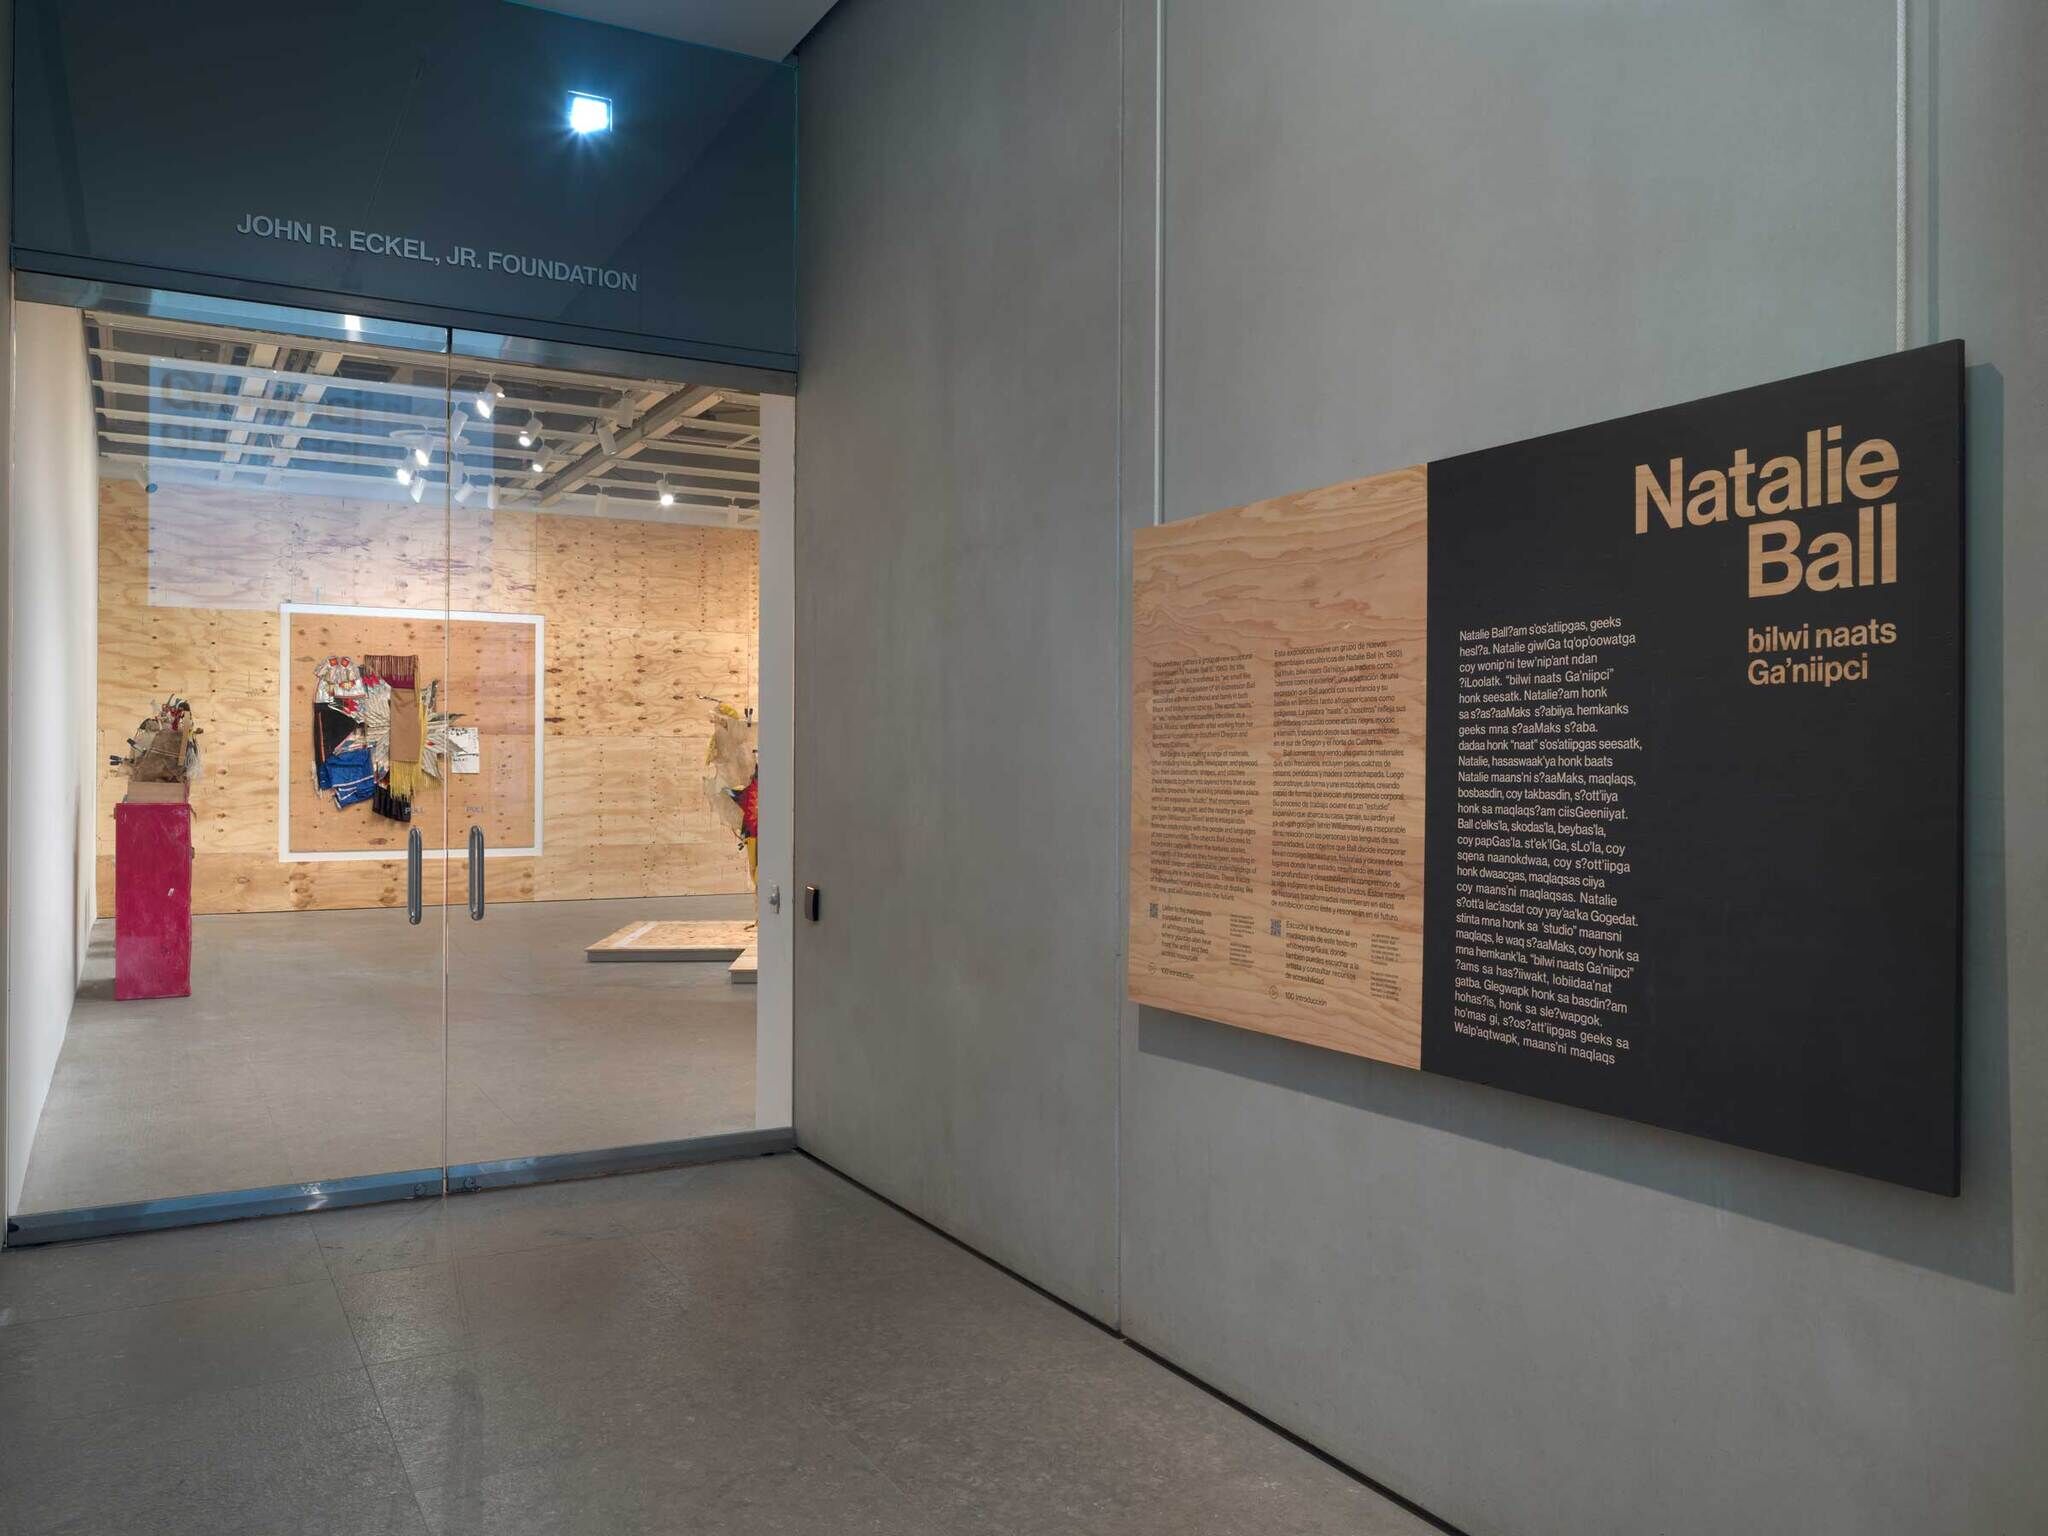 Entrance to an art gallery with "Natalie Ball" exhibition text on the wall and artwork visible through glass doors.